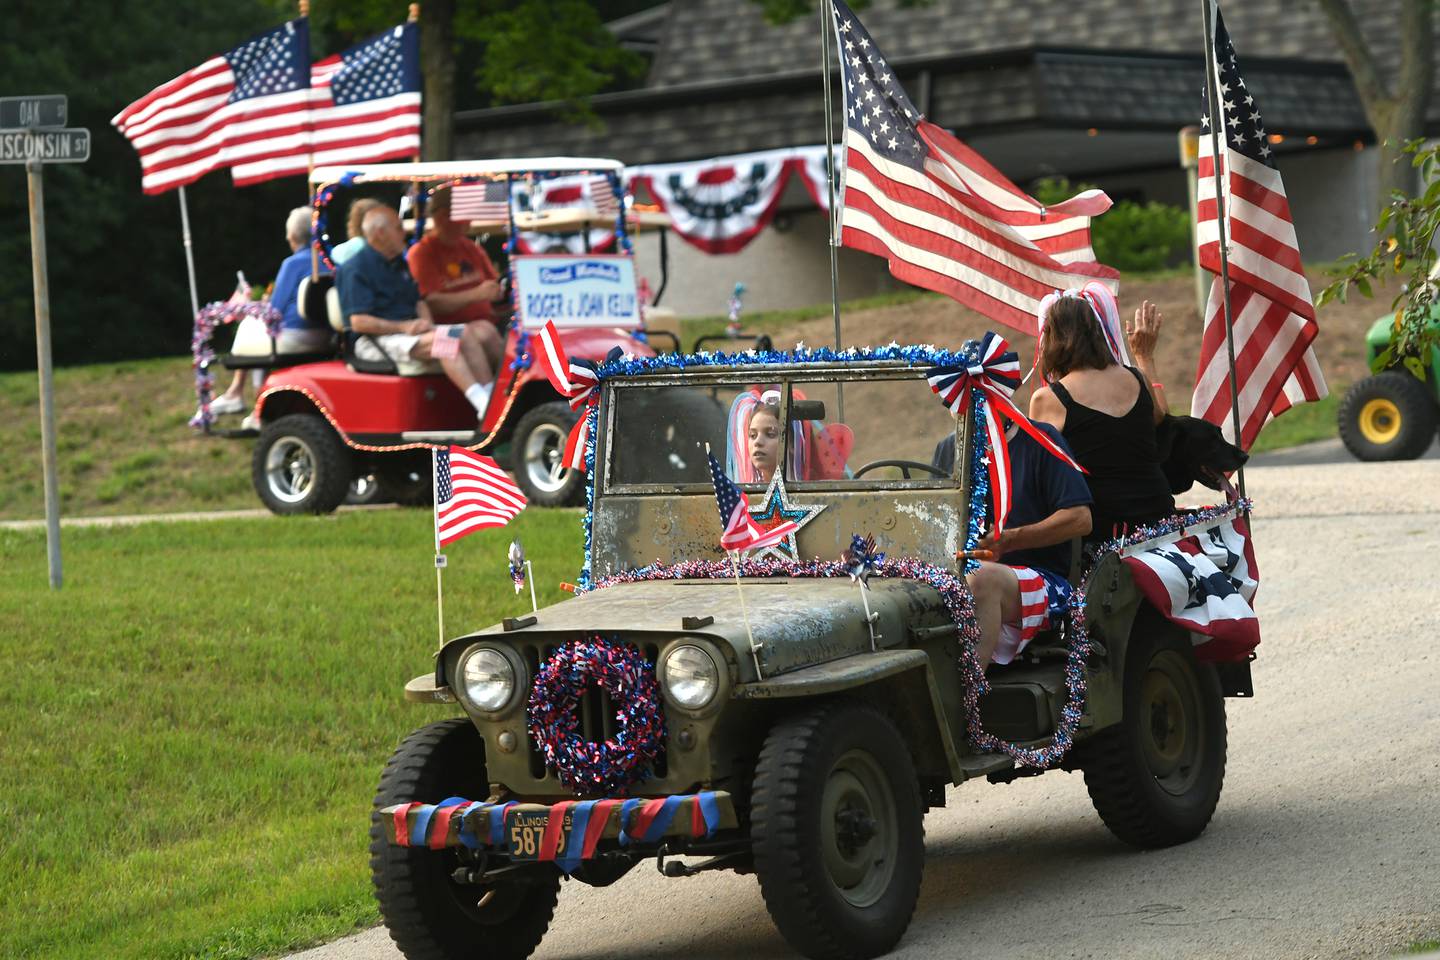 A vintage Jeep, owned by Jim and Connie Ross of Grand Detour, led the start of the 2021 Grand Detour Golf Cart Parade on July 3.